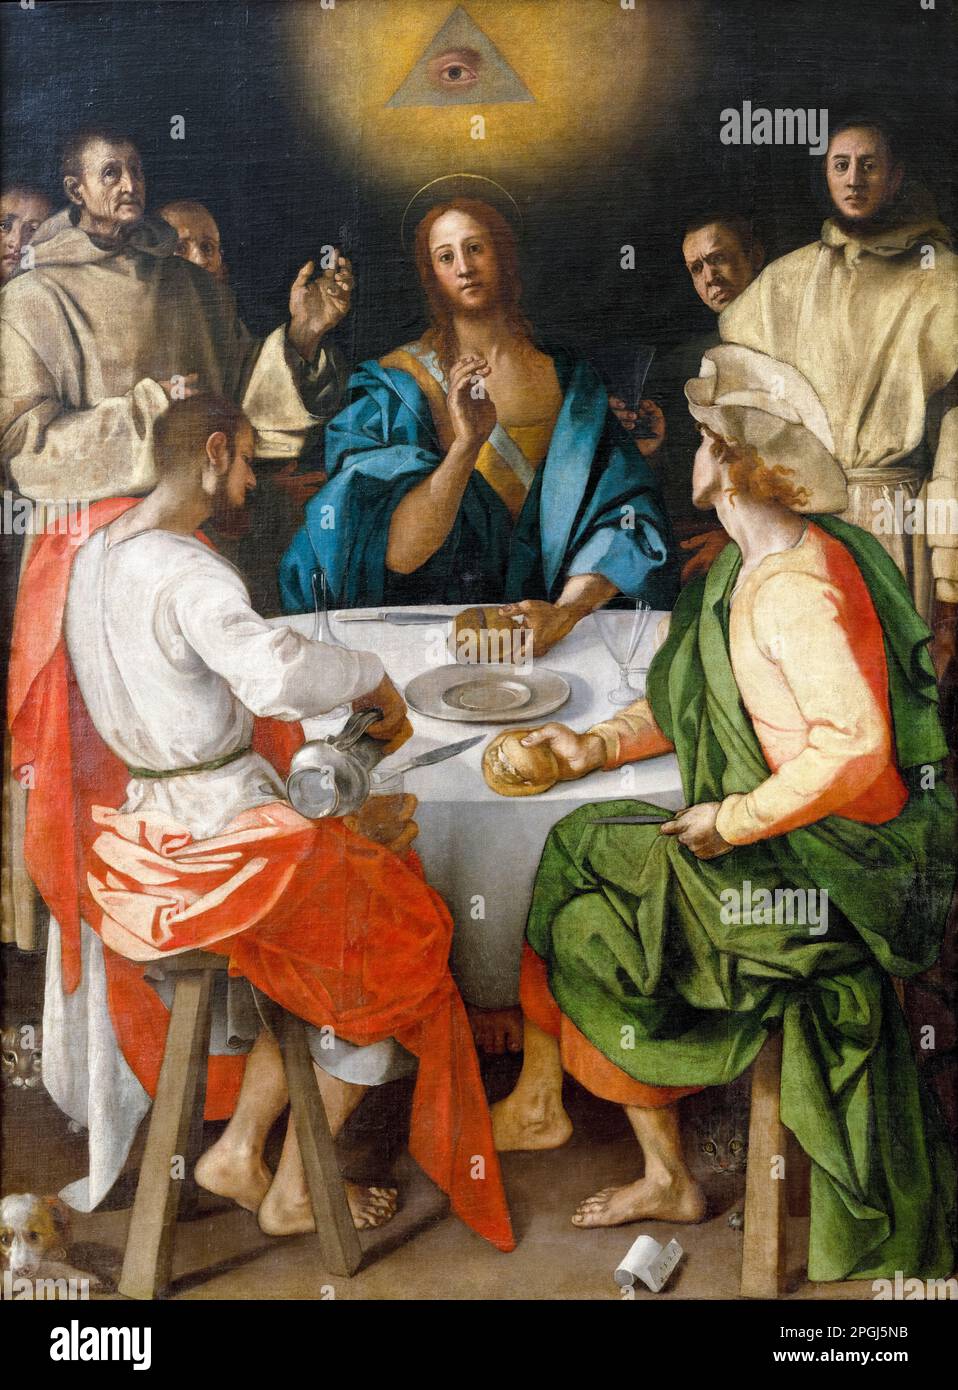 Supper at Emmaus, painting in oil on canvas by Jacopo da Pontormo, 1525 Stock Photo